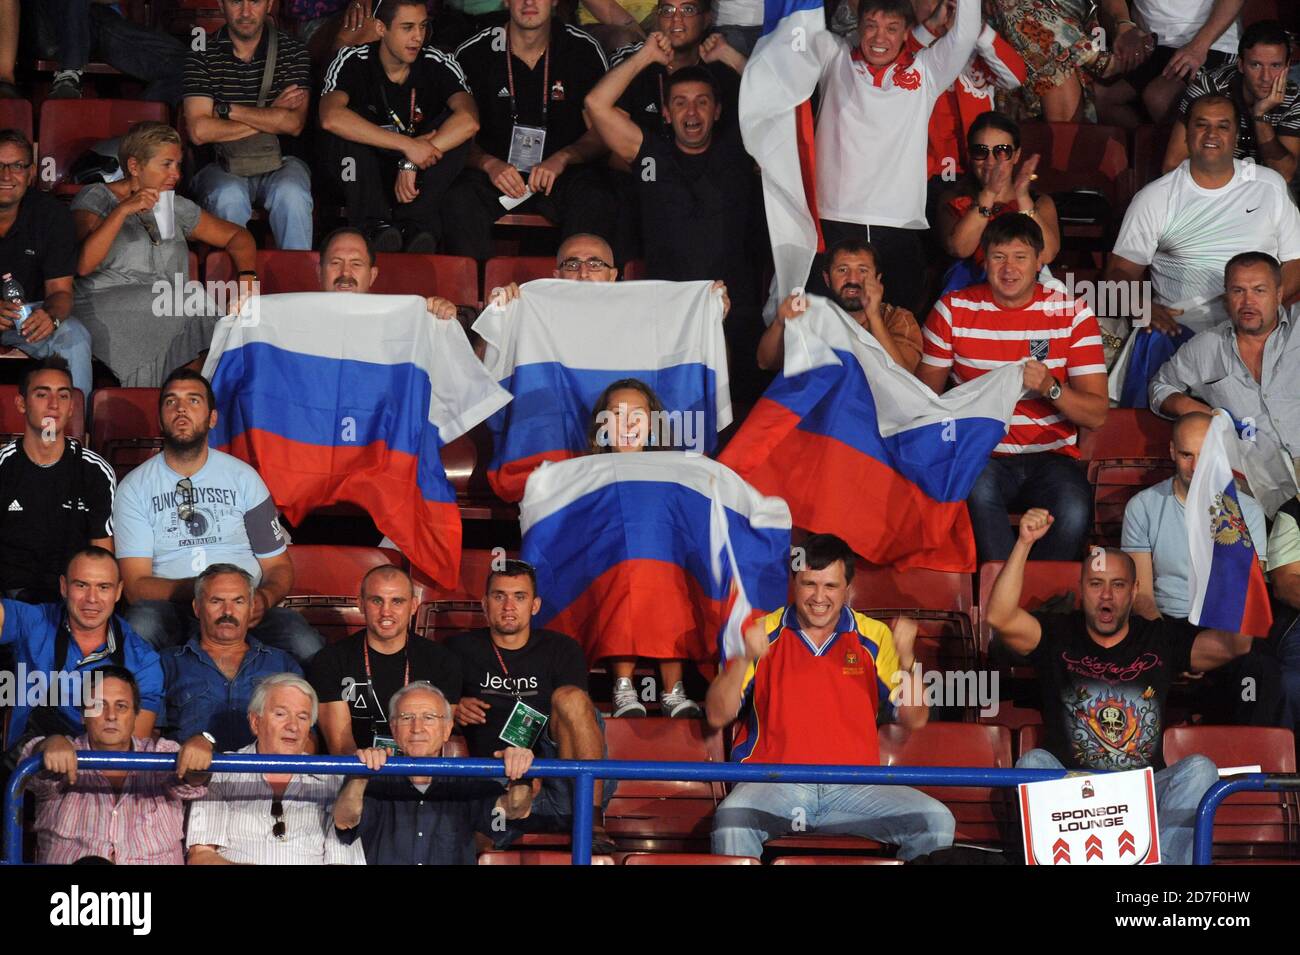 Russian fans weaving national flag to support, during an amateur boxing match during the AIBA World Boxing Champioship in Milan 2009. Stock Photo